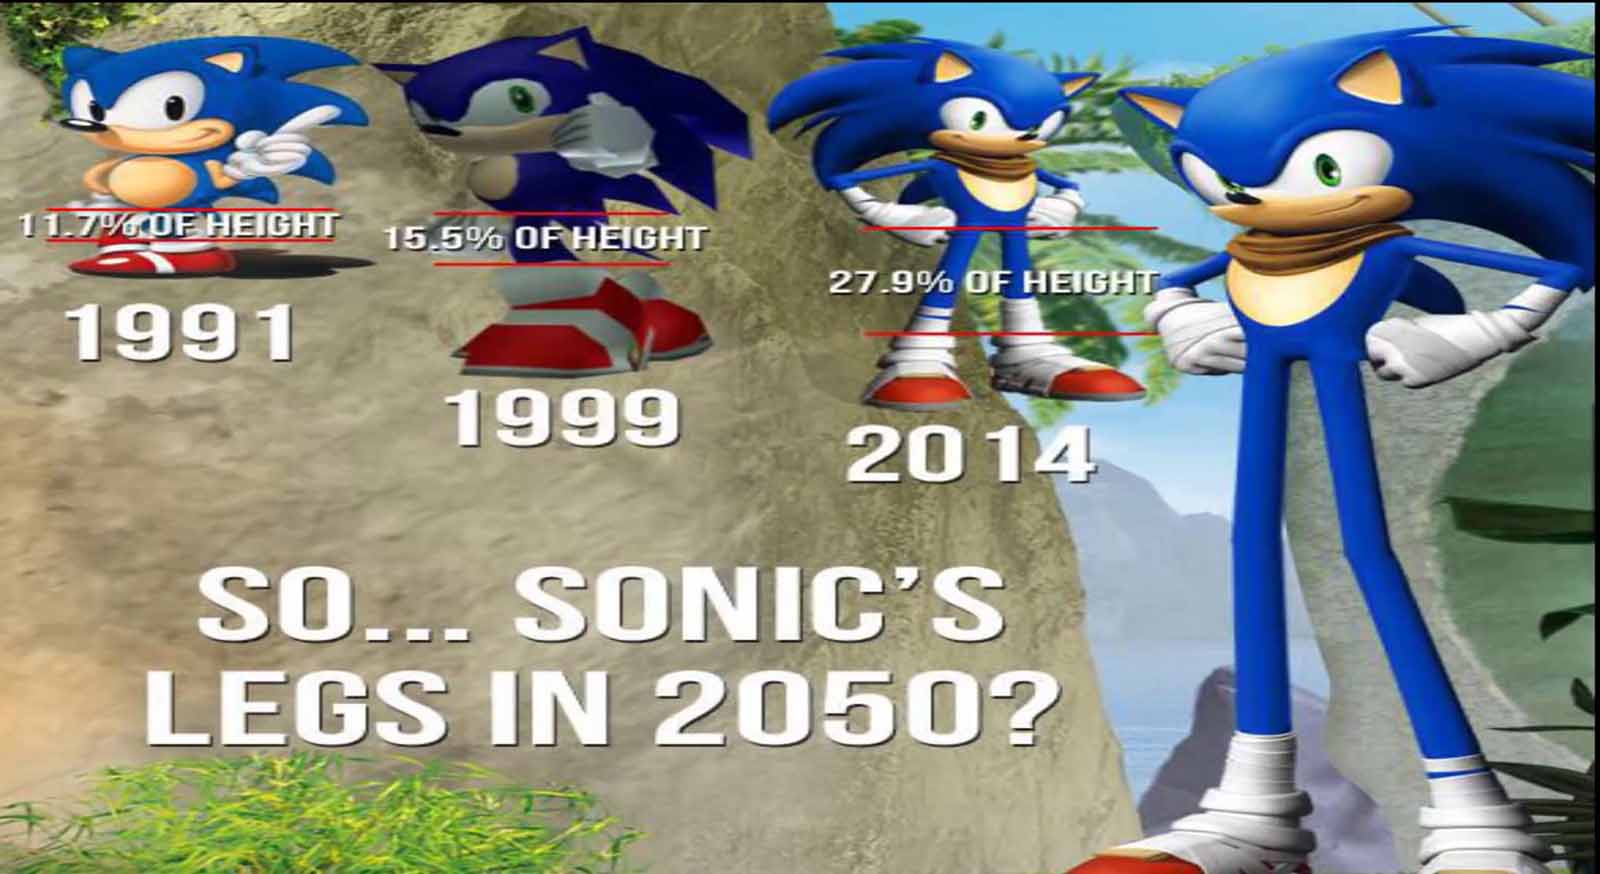 Sure, the Sonic games have gotten significantly worse over the years, and w...